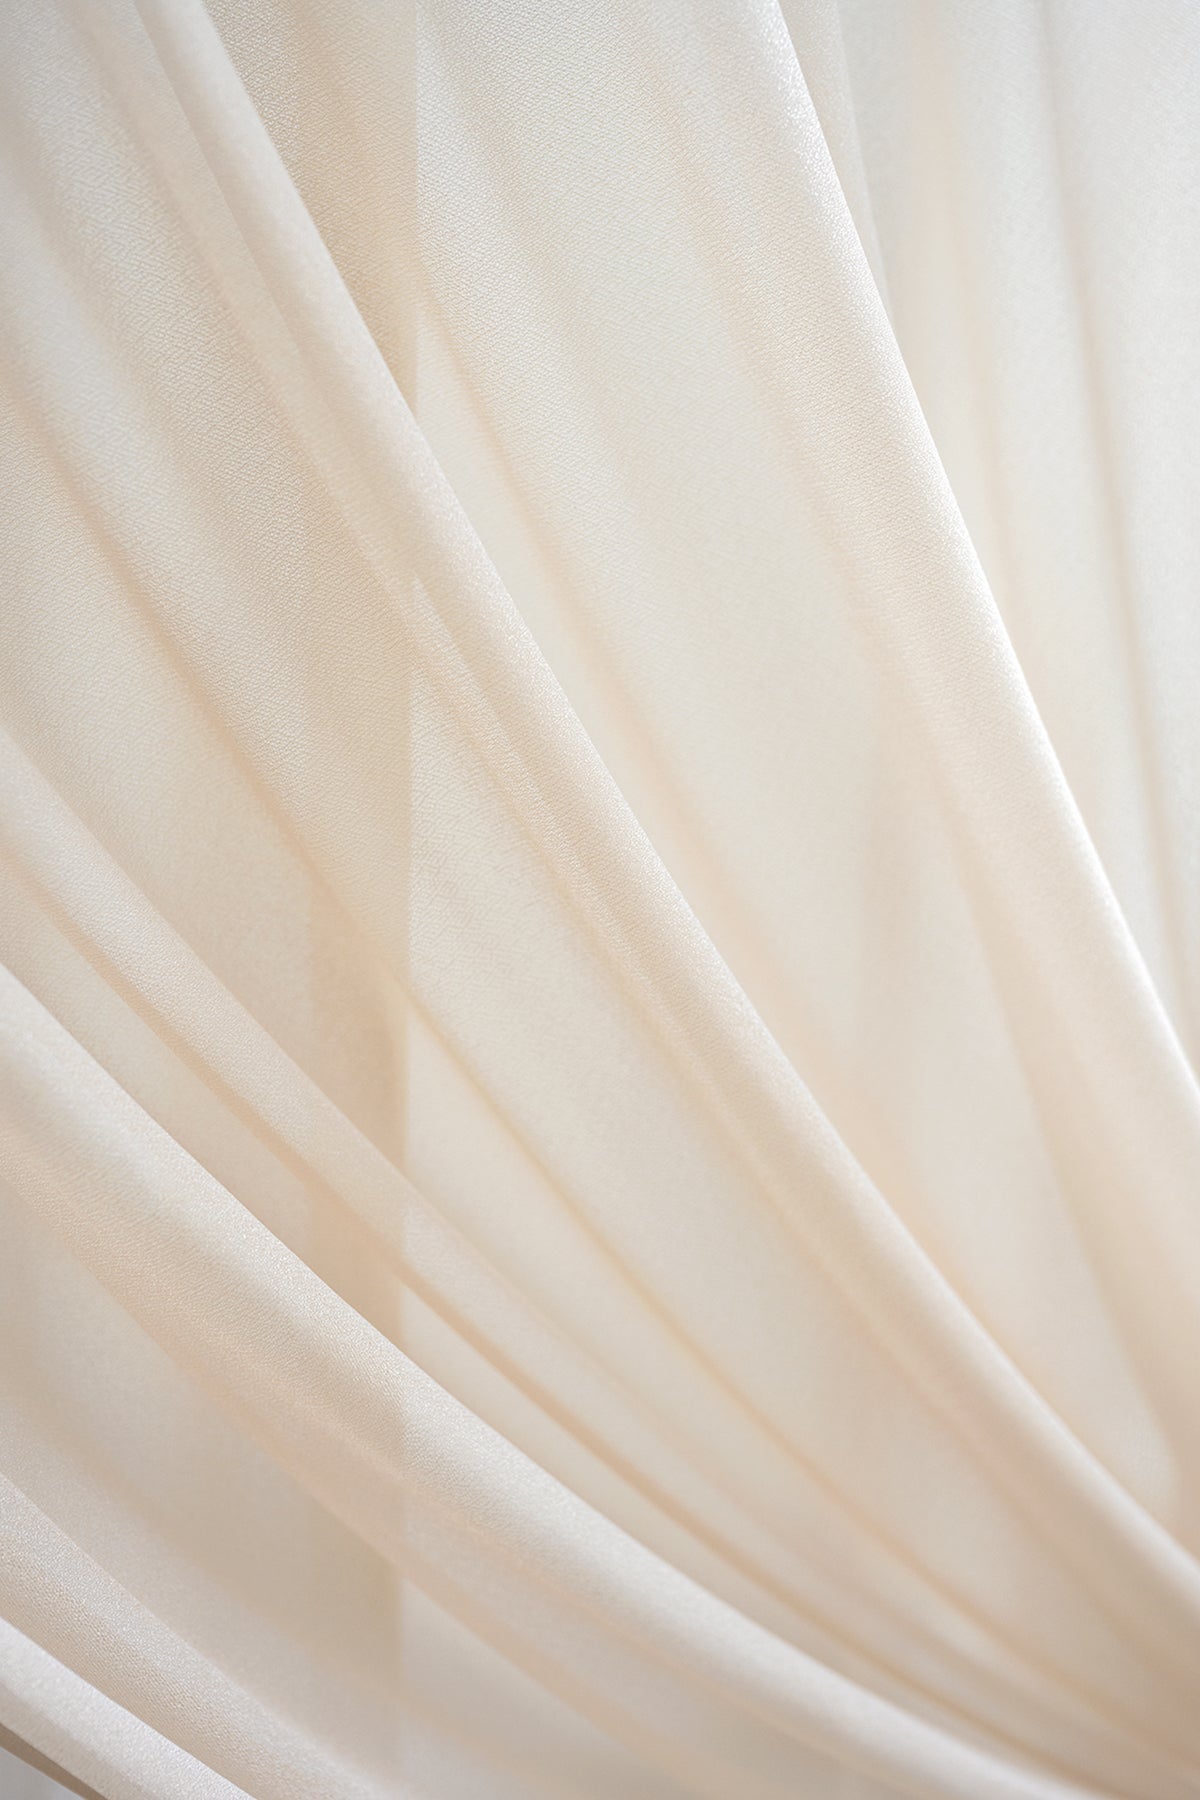 2-Layer Wedding Backdrop Curtains 59" x 10ft (Set of 2) - 6 Colors | Limited-Time